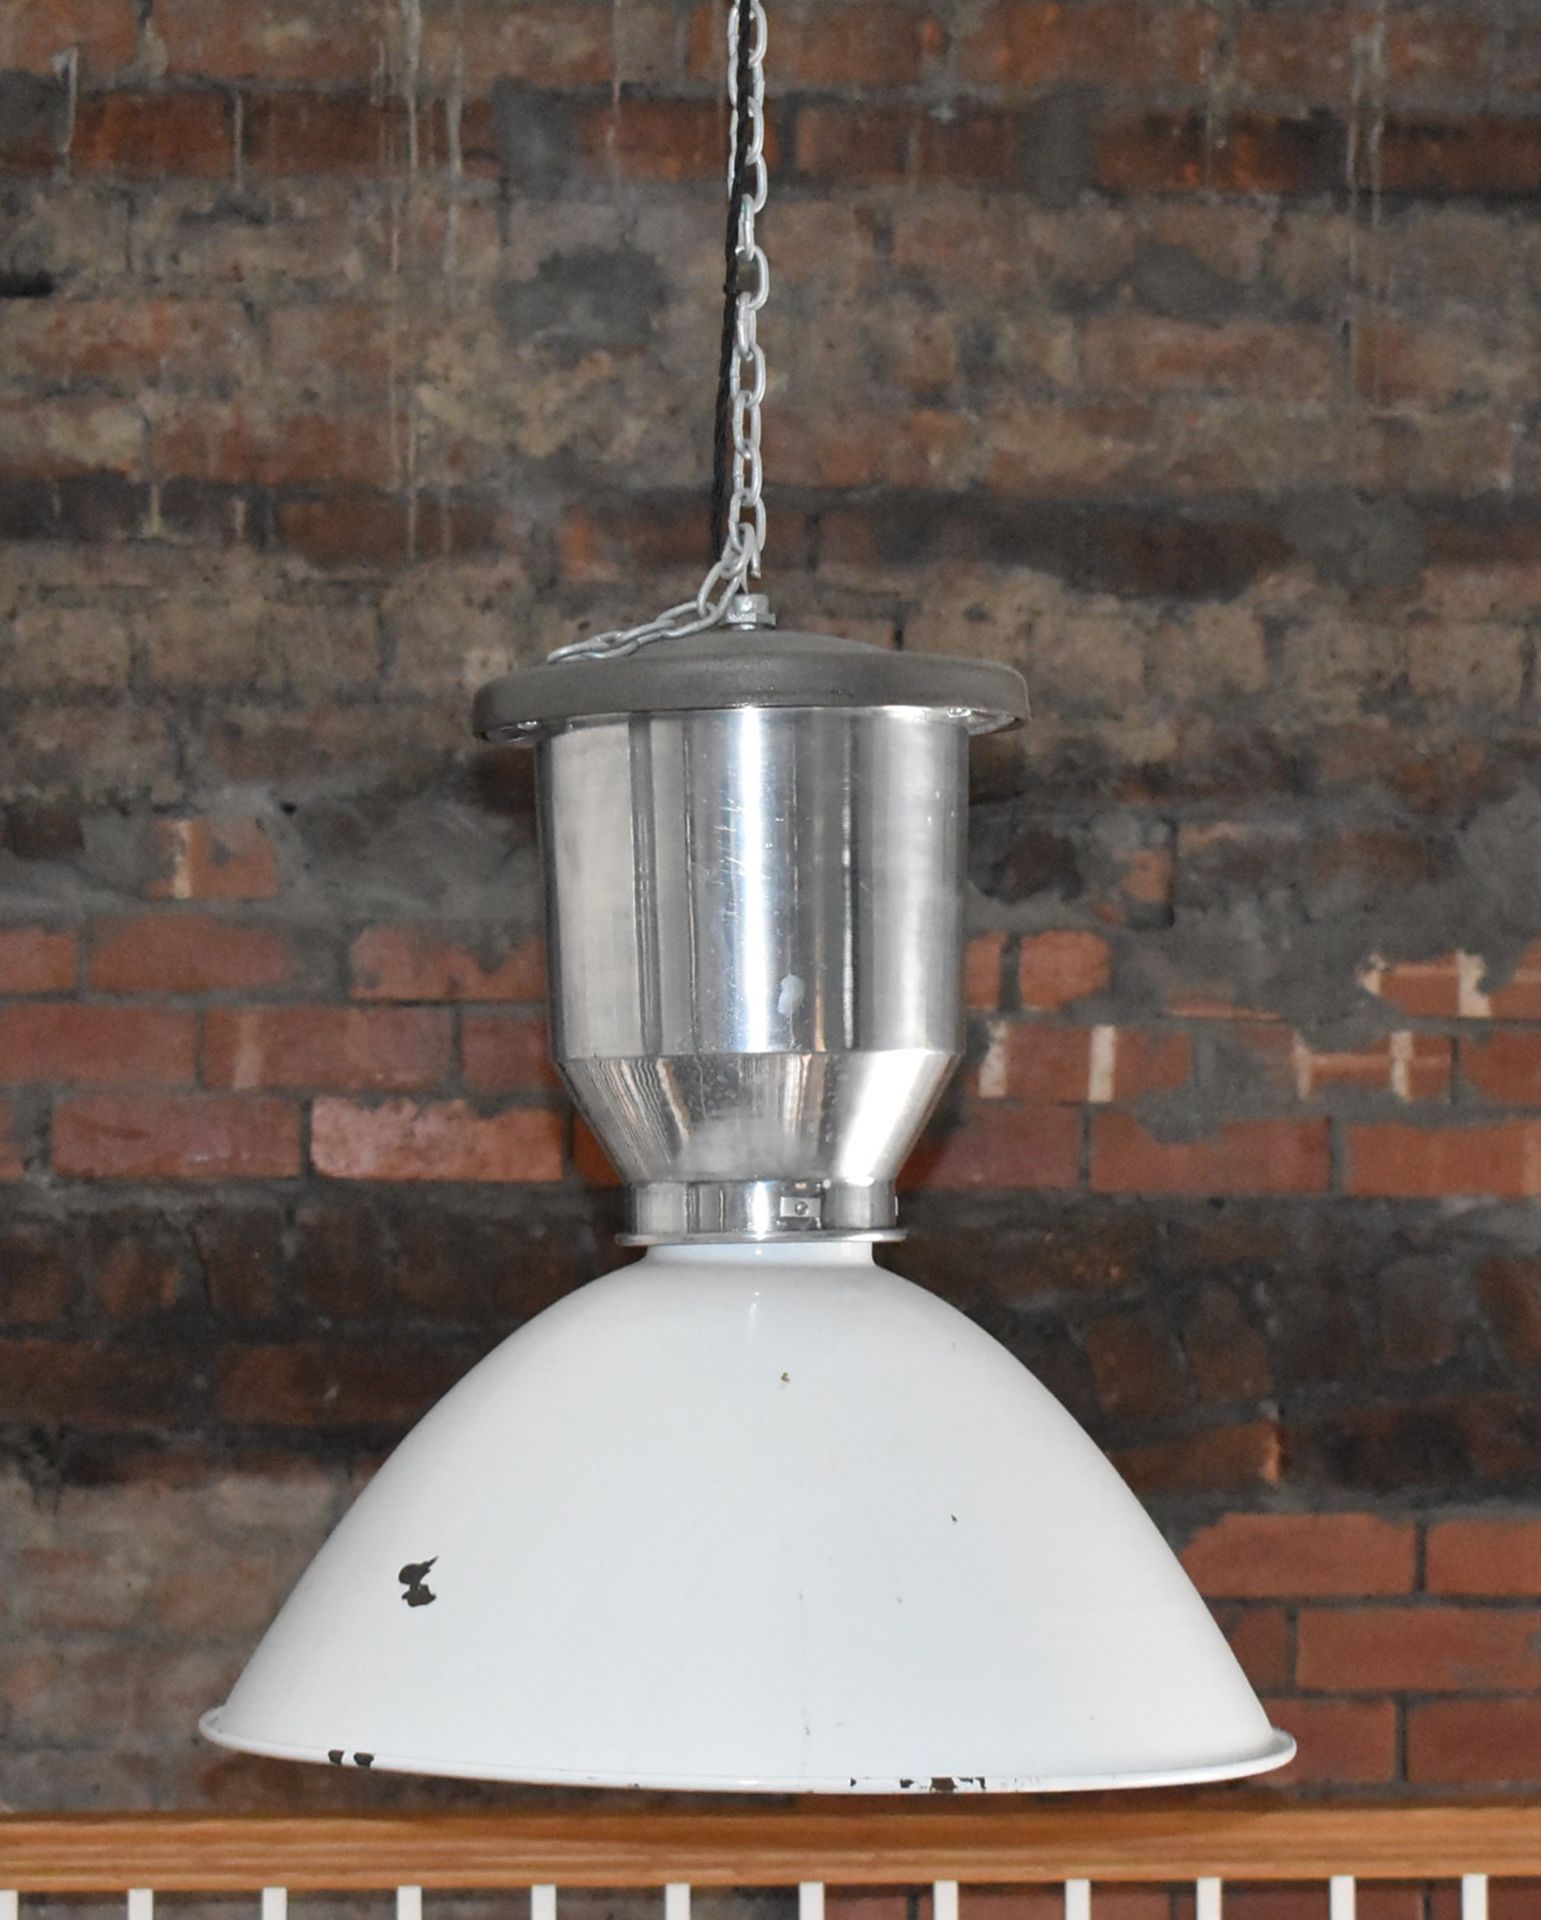 3 x Large Factory Lights With Enamelled Shades, Polished Aluminum Lamp Enclosure and Brushed Steel - Image 2 of 6